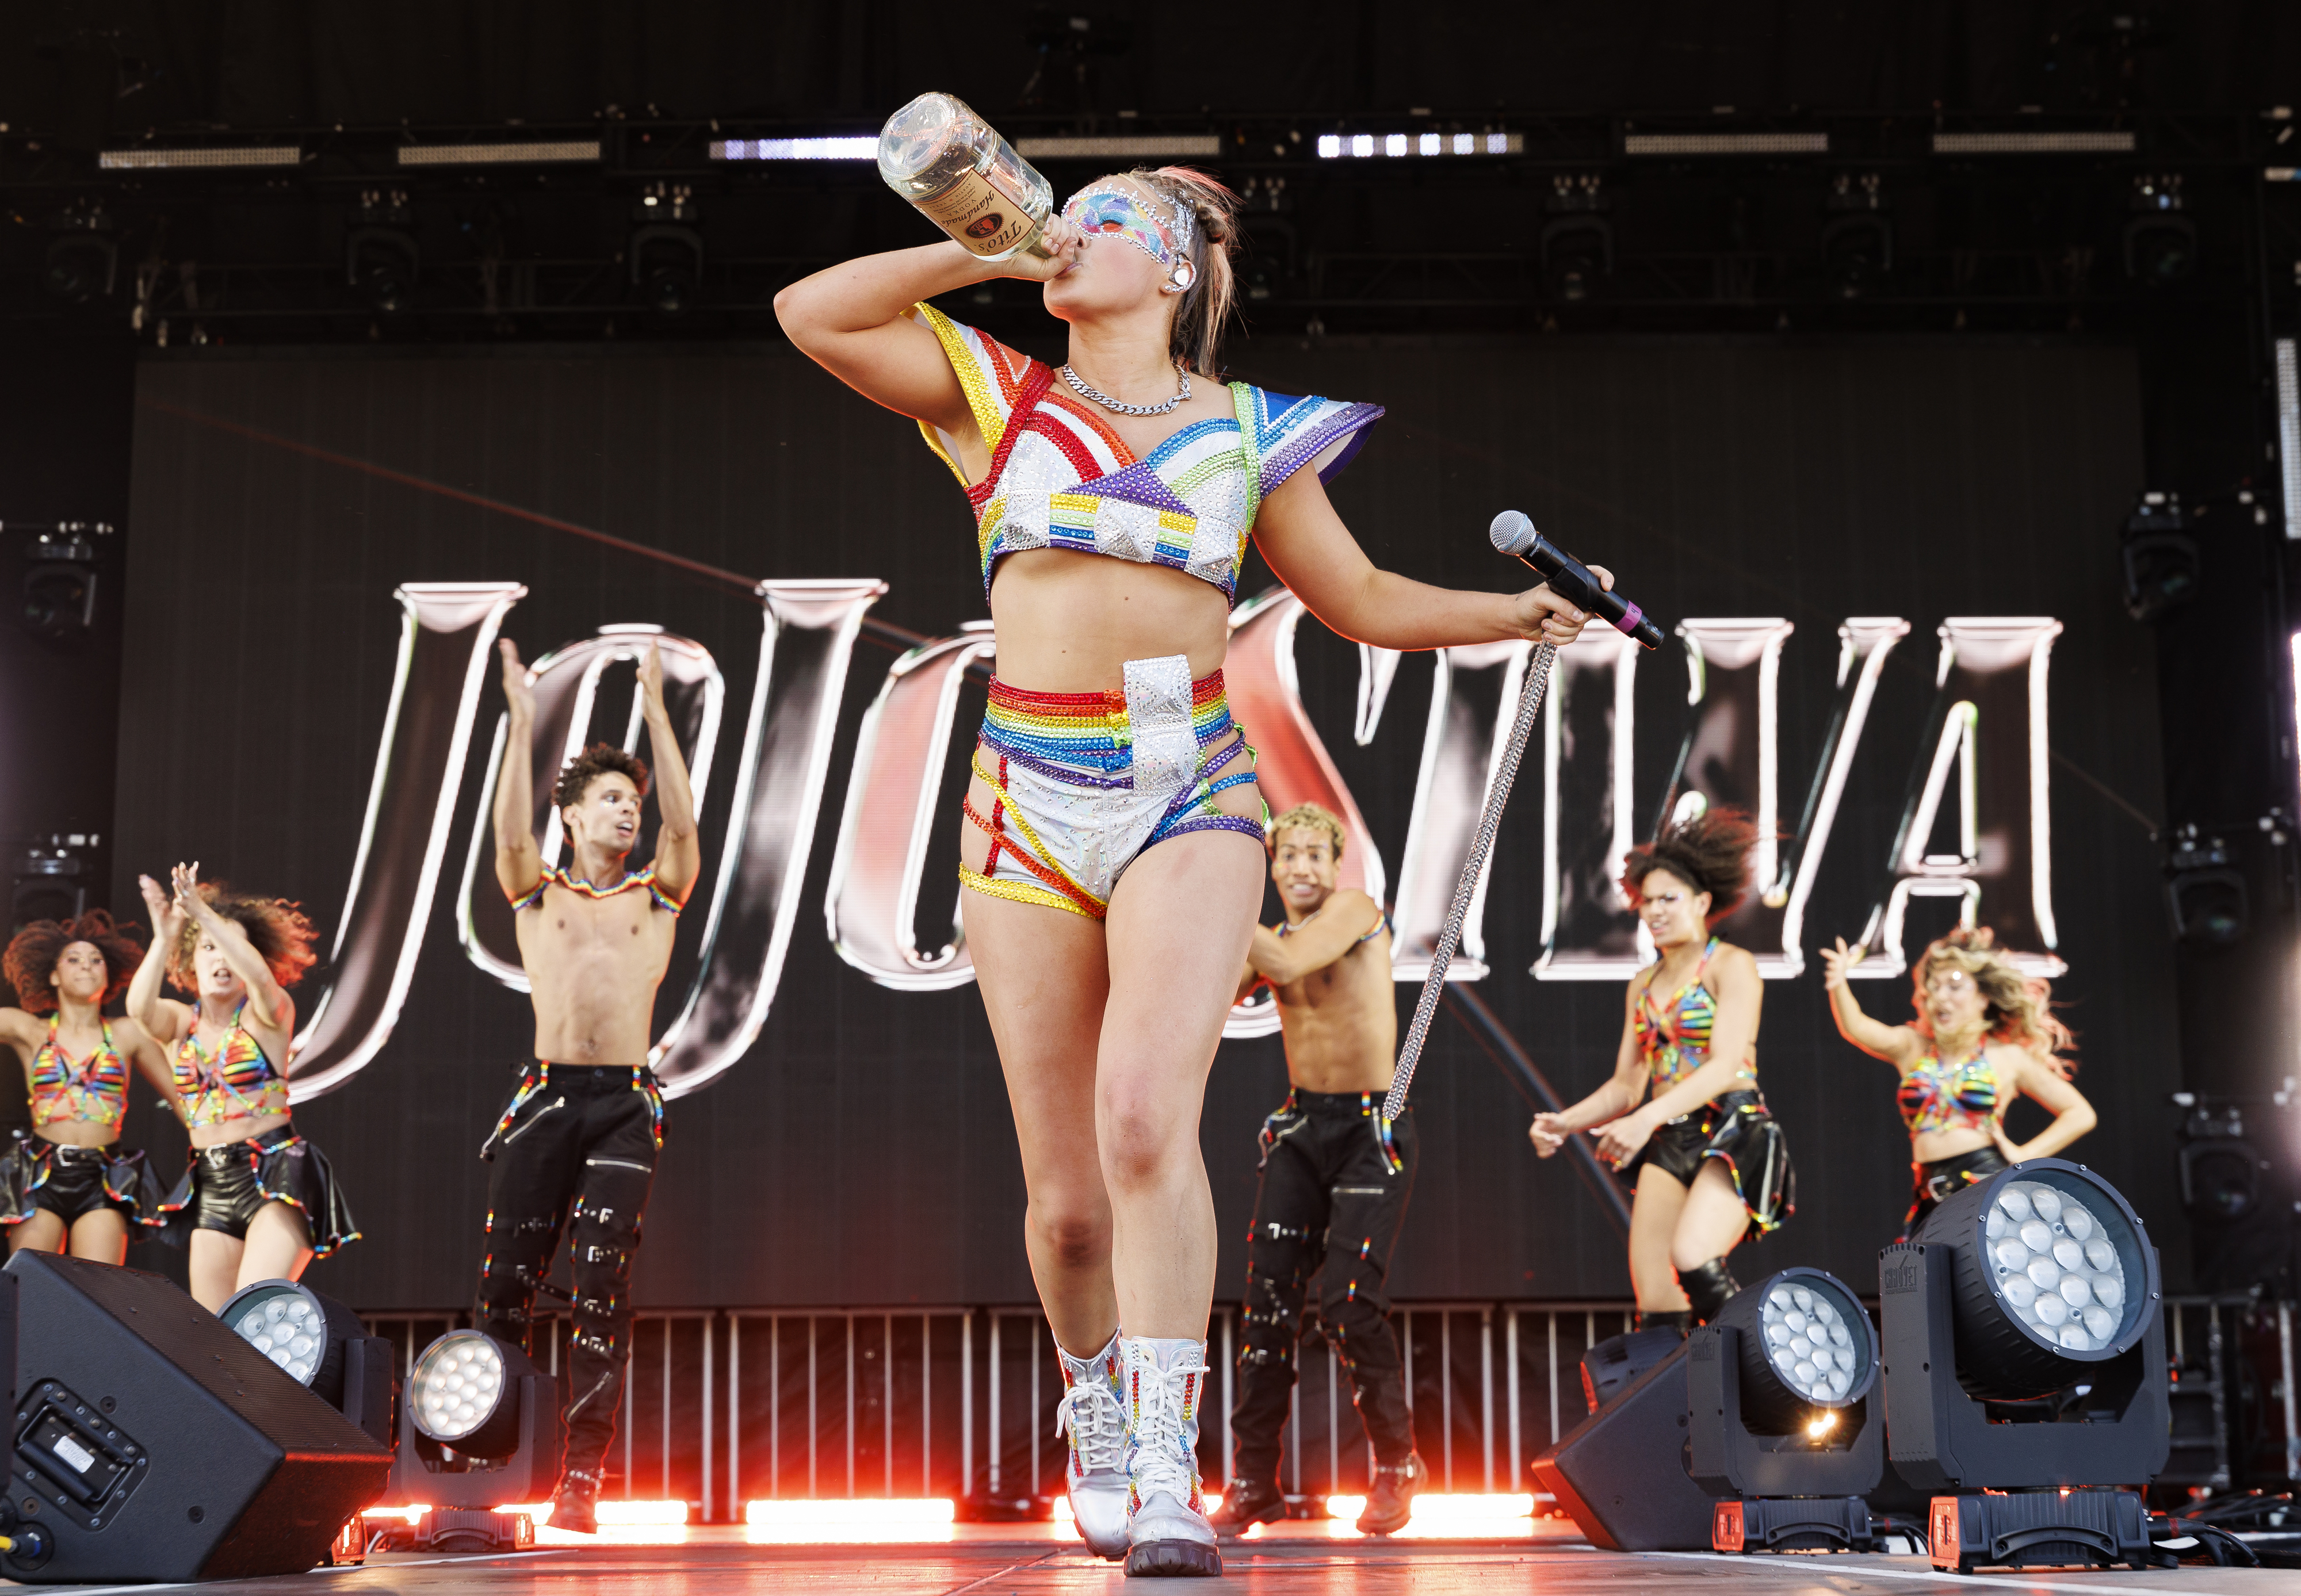 JoJo Siwa performs on stage in a rainbow-themed outfit with backup dancers in similar outfits. She is seen drinking from a large bottle while holding a microphone